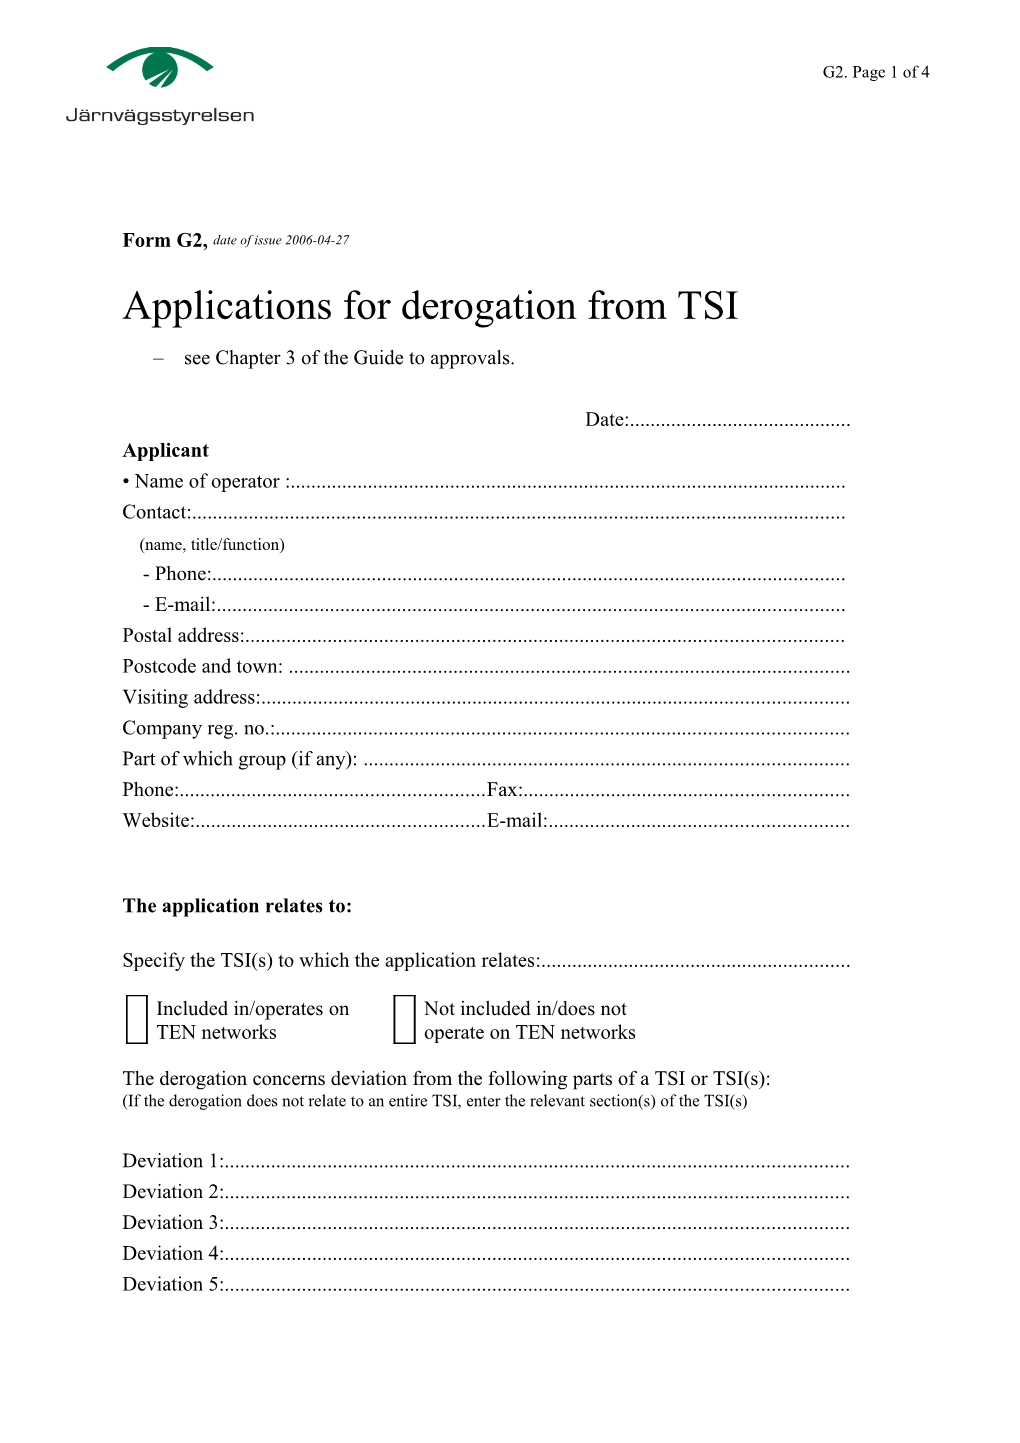 Applications for Derogation from TSI